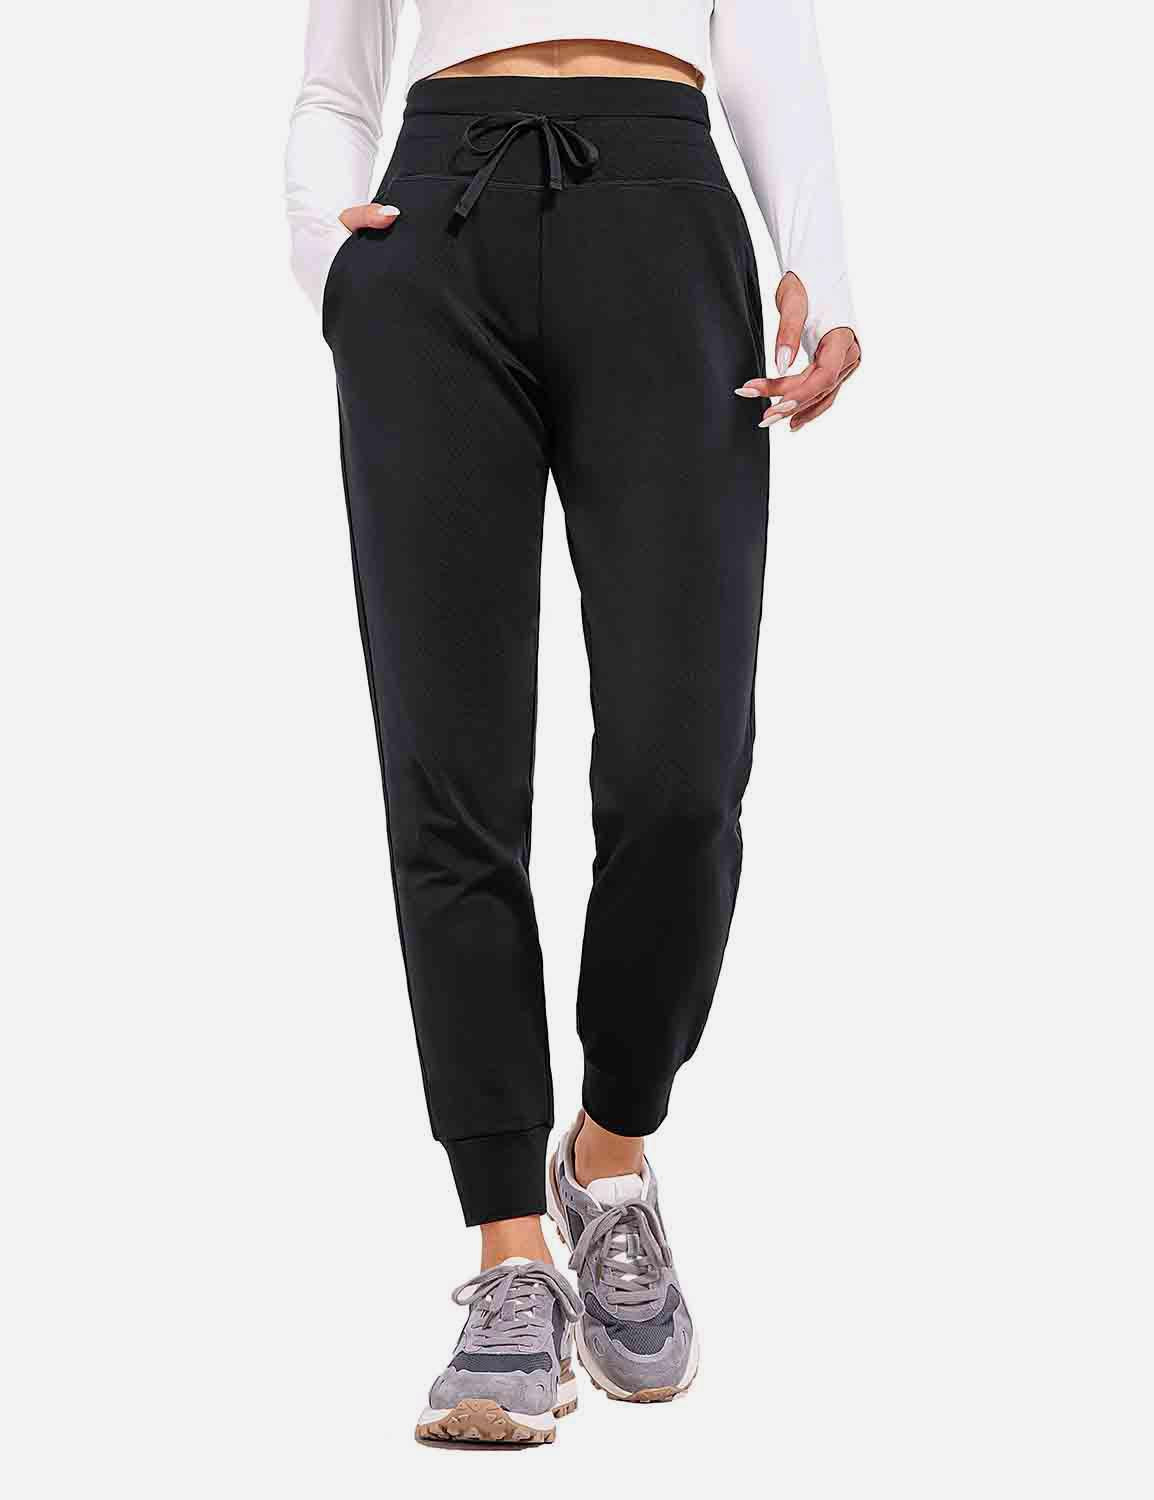 Baleaf Women's High Rise Water Resistant Tapered Joggers – Baleaf Sports